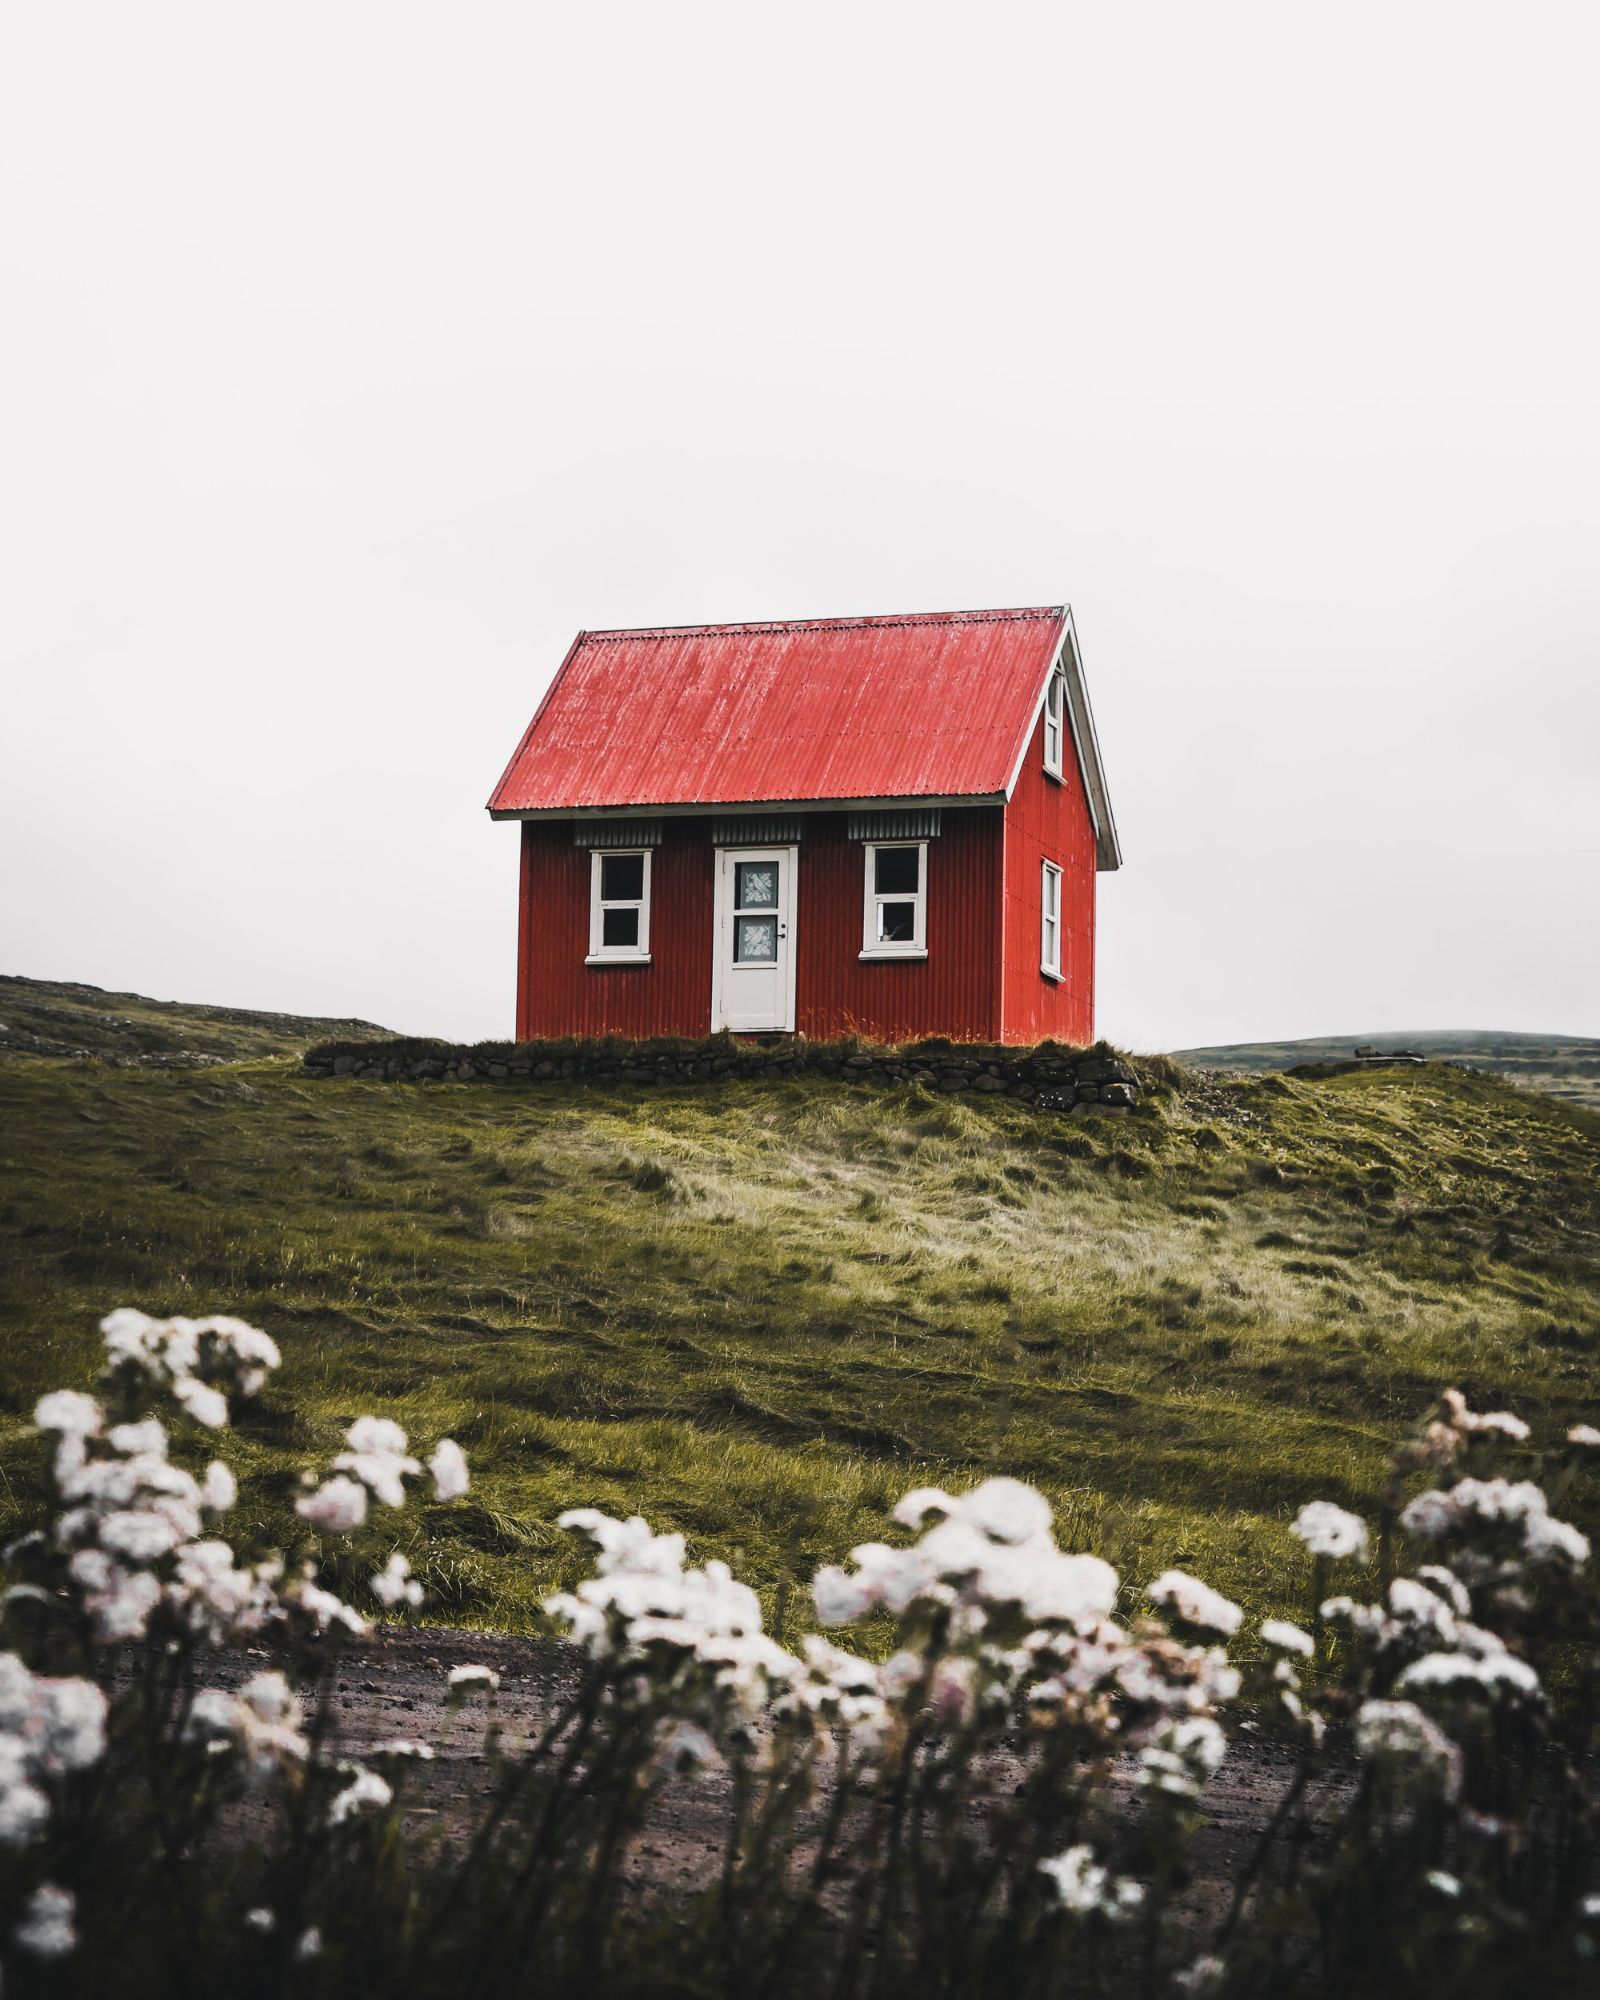 A small red house standing alone in the countryside